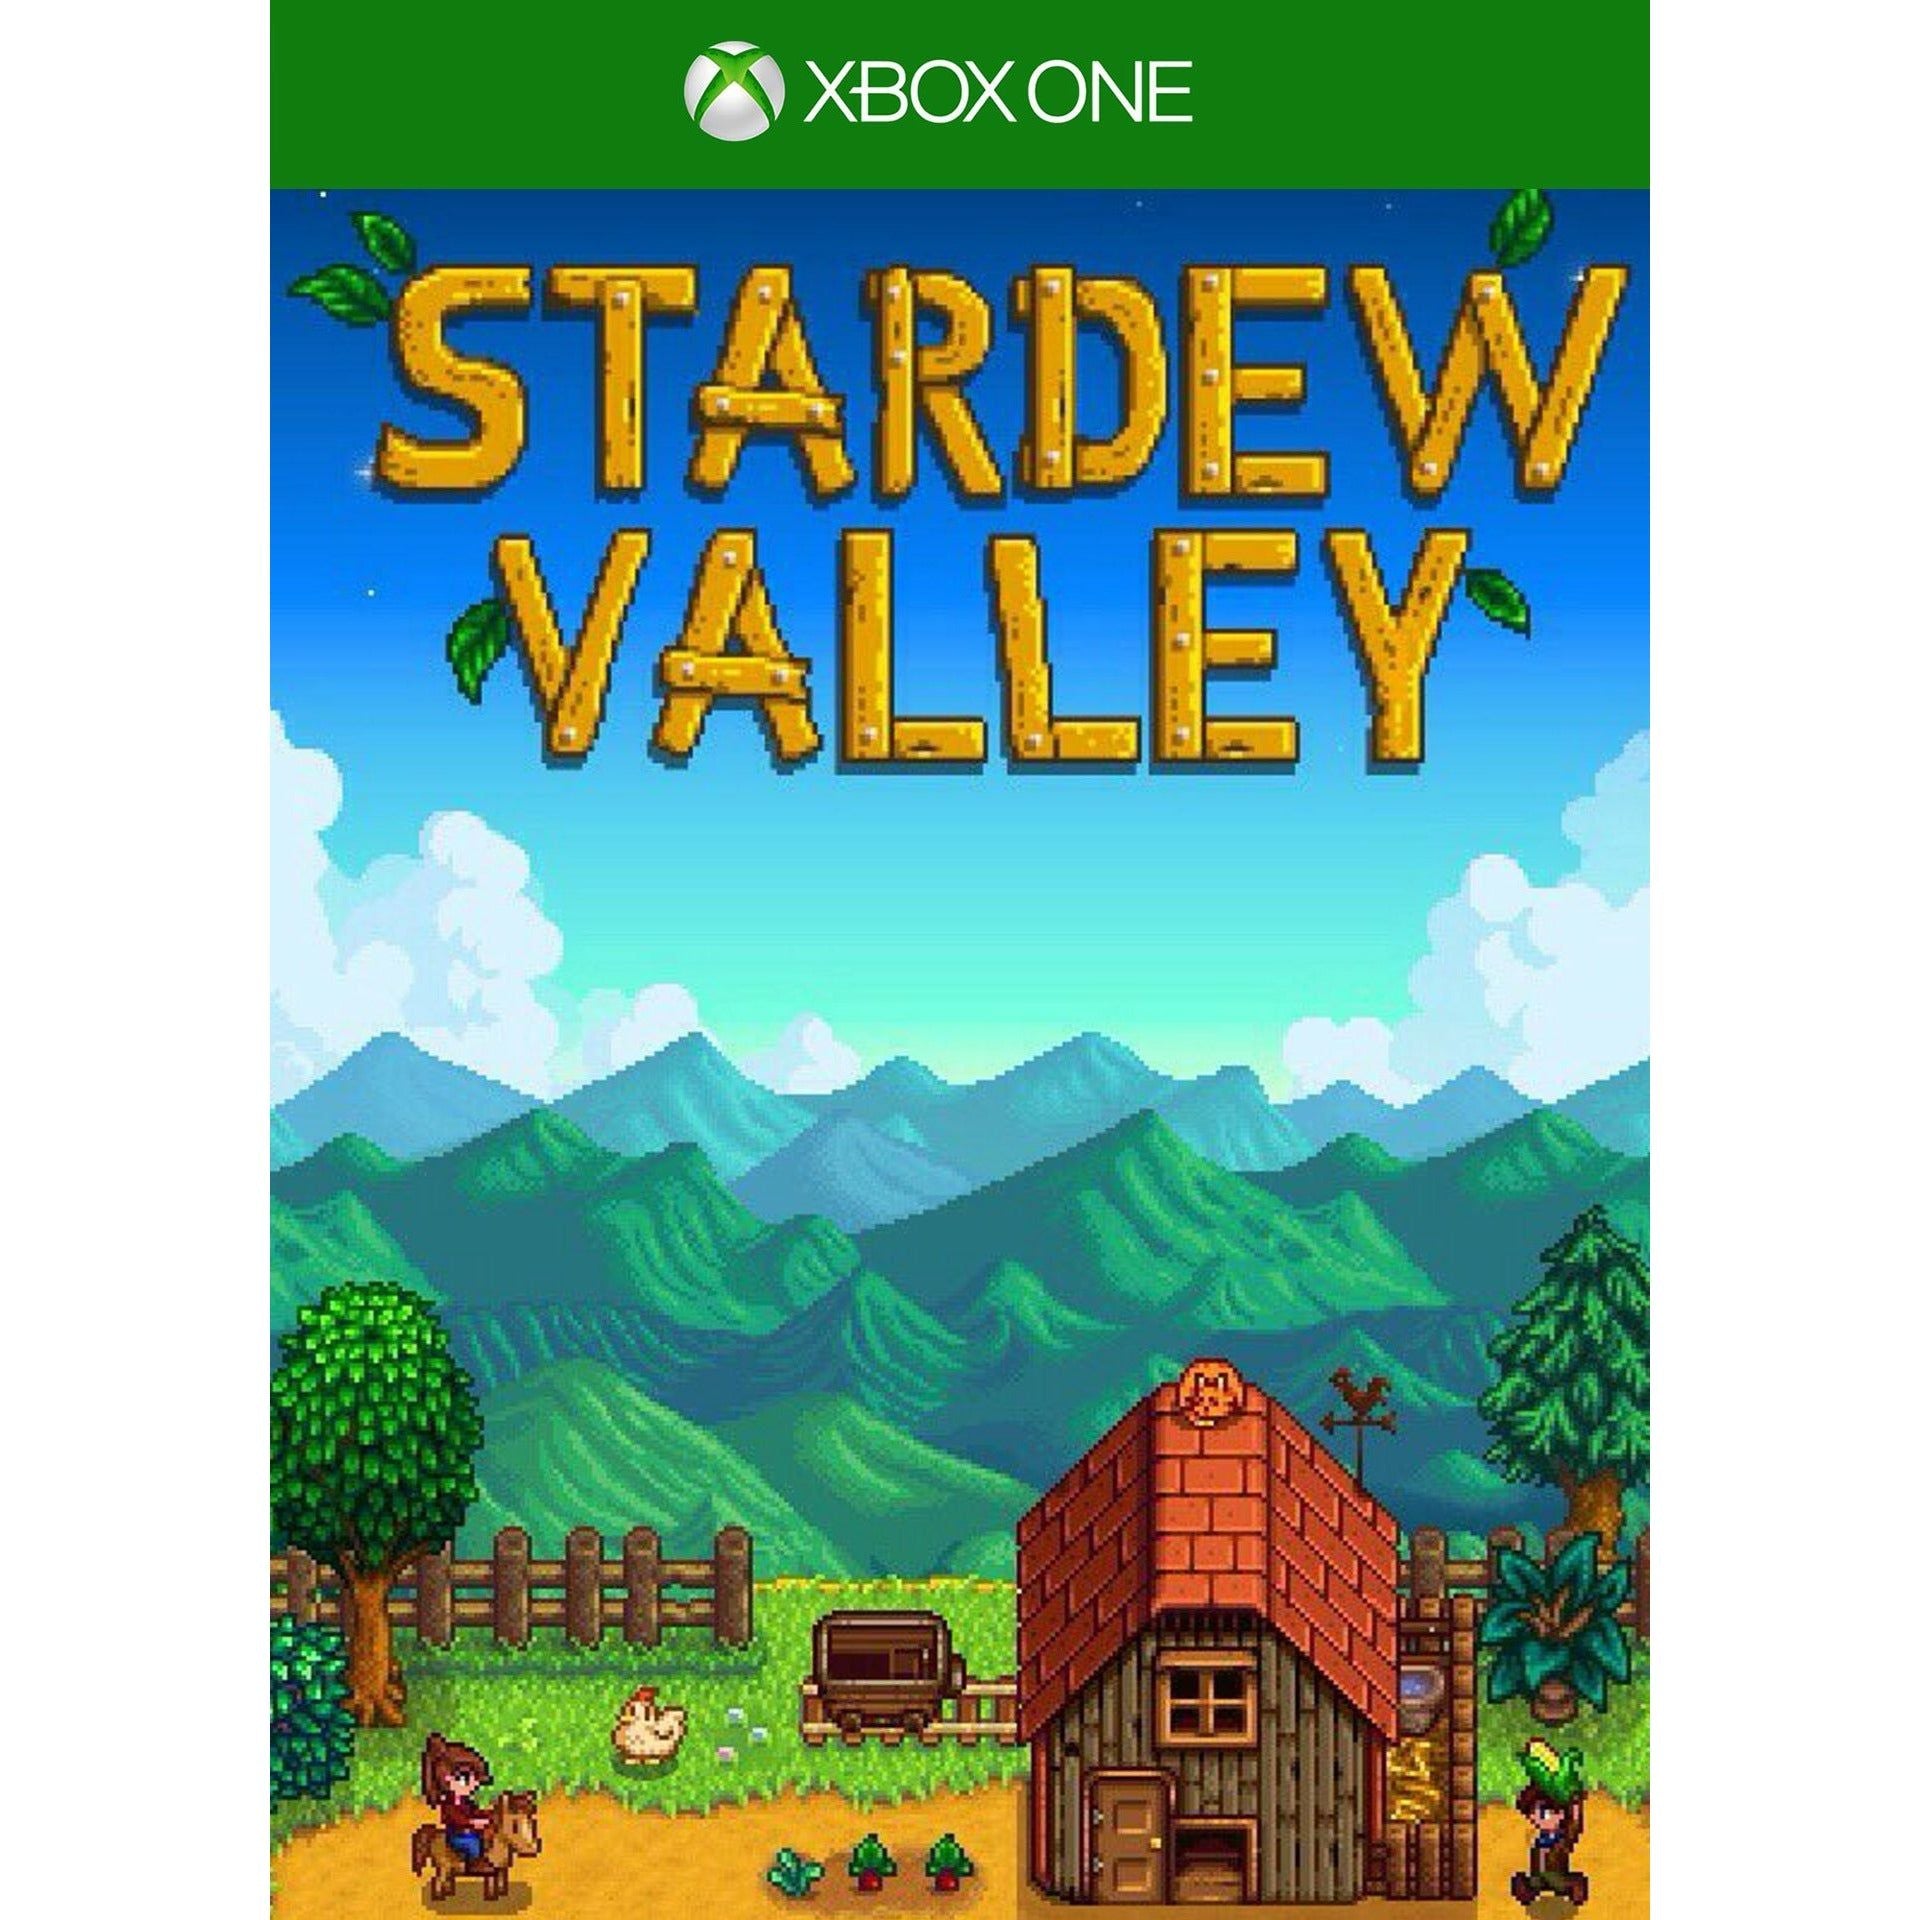 XBOX ONE - Stardew Valley Collector's Edition